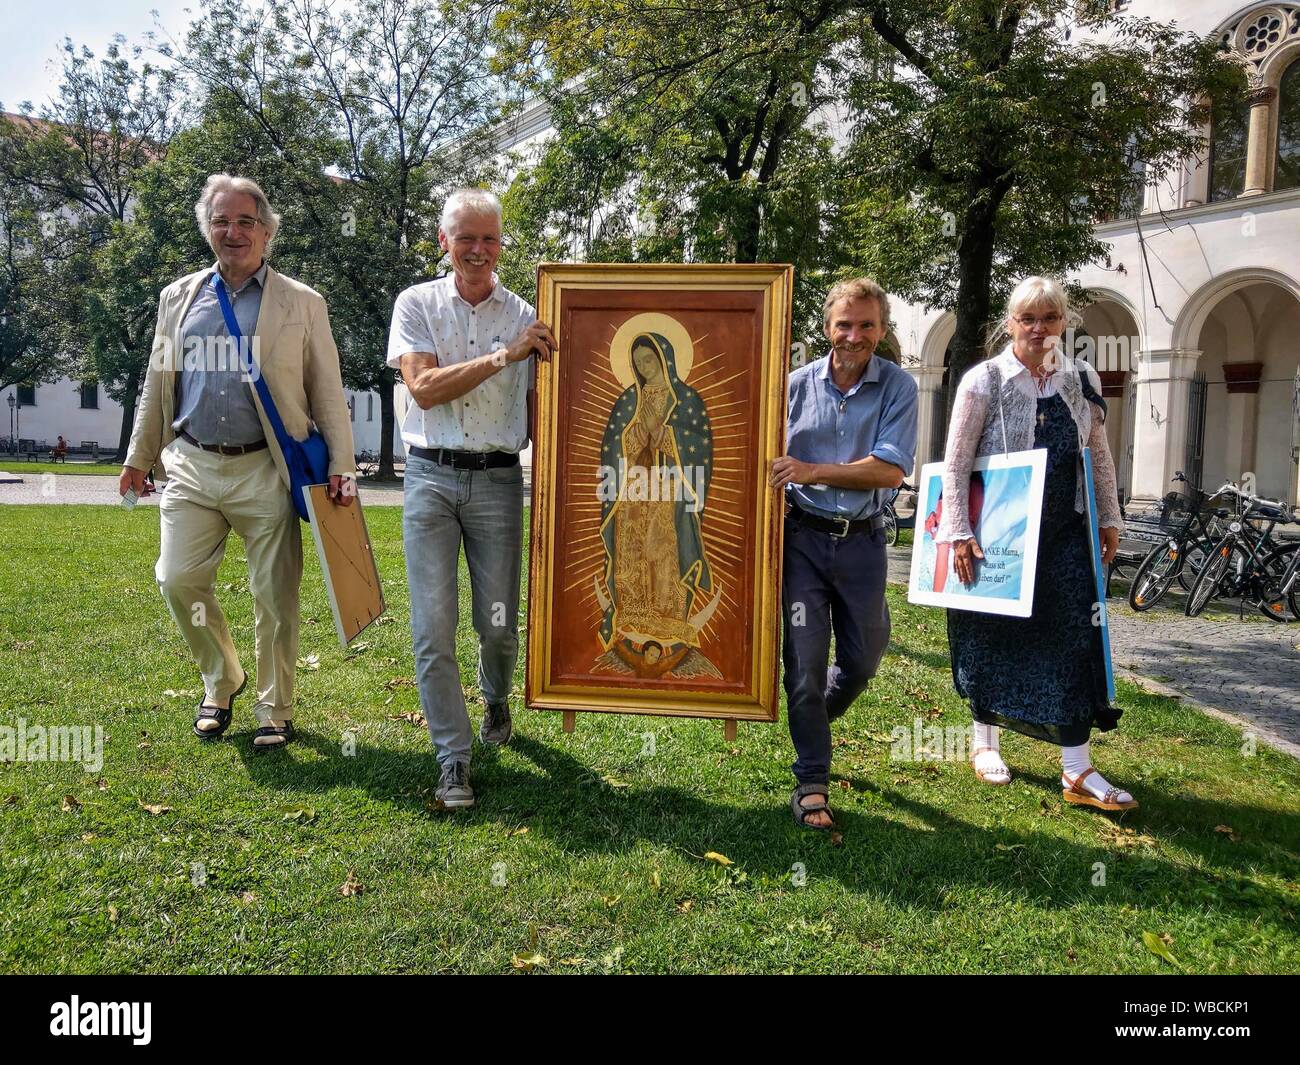 Munich, Bavaria, Germany. 26th Aug, 2019. Anti-abortion activist WOLFGANG HERRING (L) leads a vigil with a painting of the Virgin Mary. Headed by well-known anti abortion activist Wolfgang Herring, a small group of Christian anti-abortion activists marched through the city of Munich, protesting against the Pro Familia organization who offers counseling services for pregnant women, ultimately ending at the Ludwig Maximilian University's Geschwister Scholl Platz. Credit: Sachelle Babbar/ZUMA Wire/Alamy Live News Stock Photo